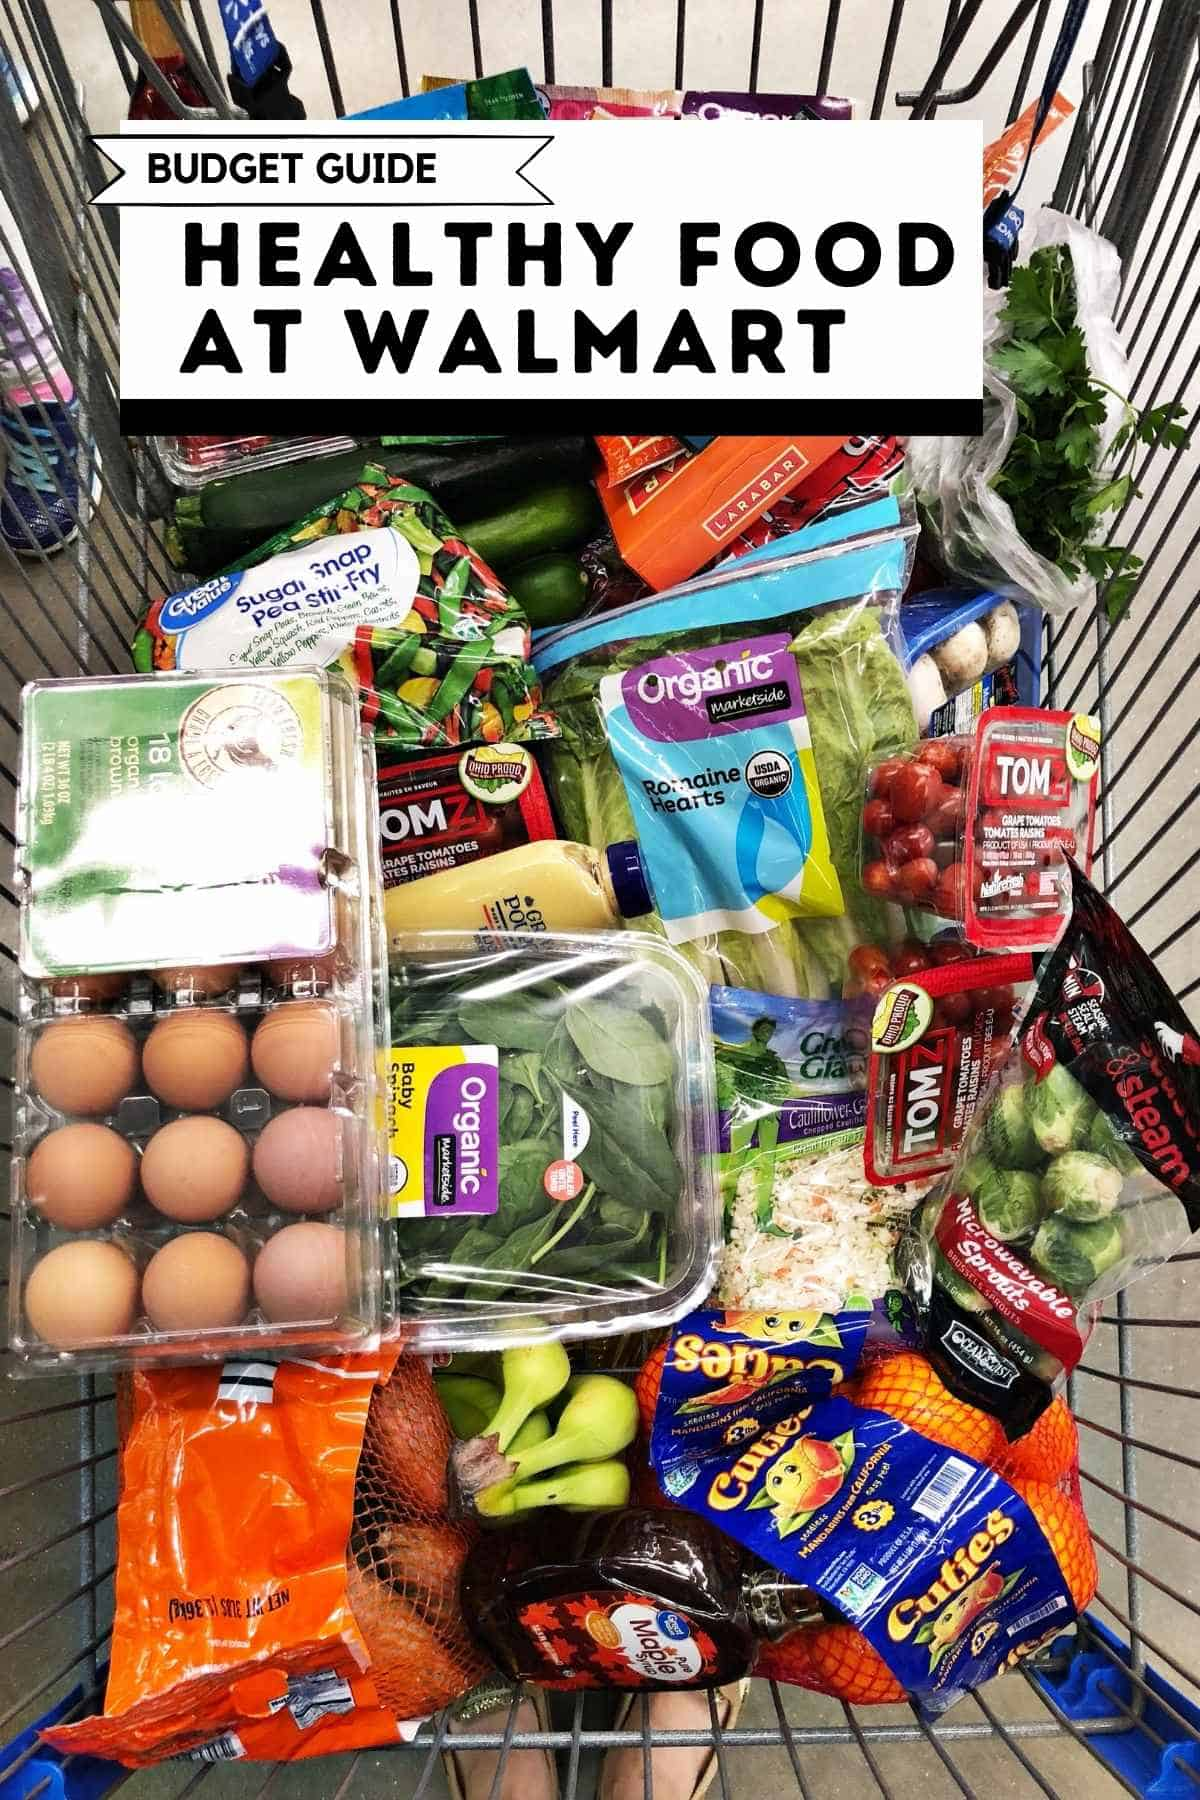 Top 10 Healthy Grocery Items To Buy At Walmart